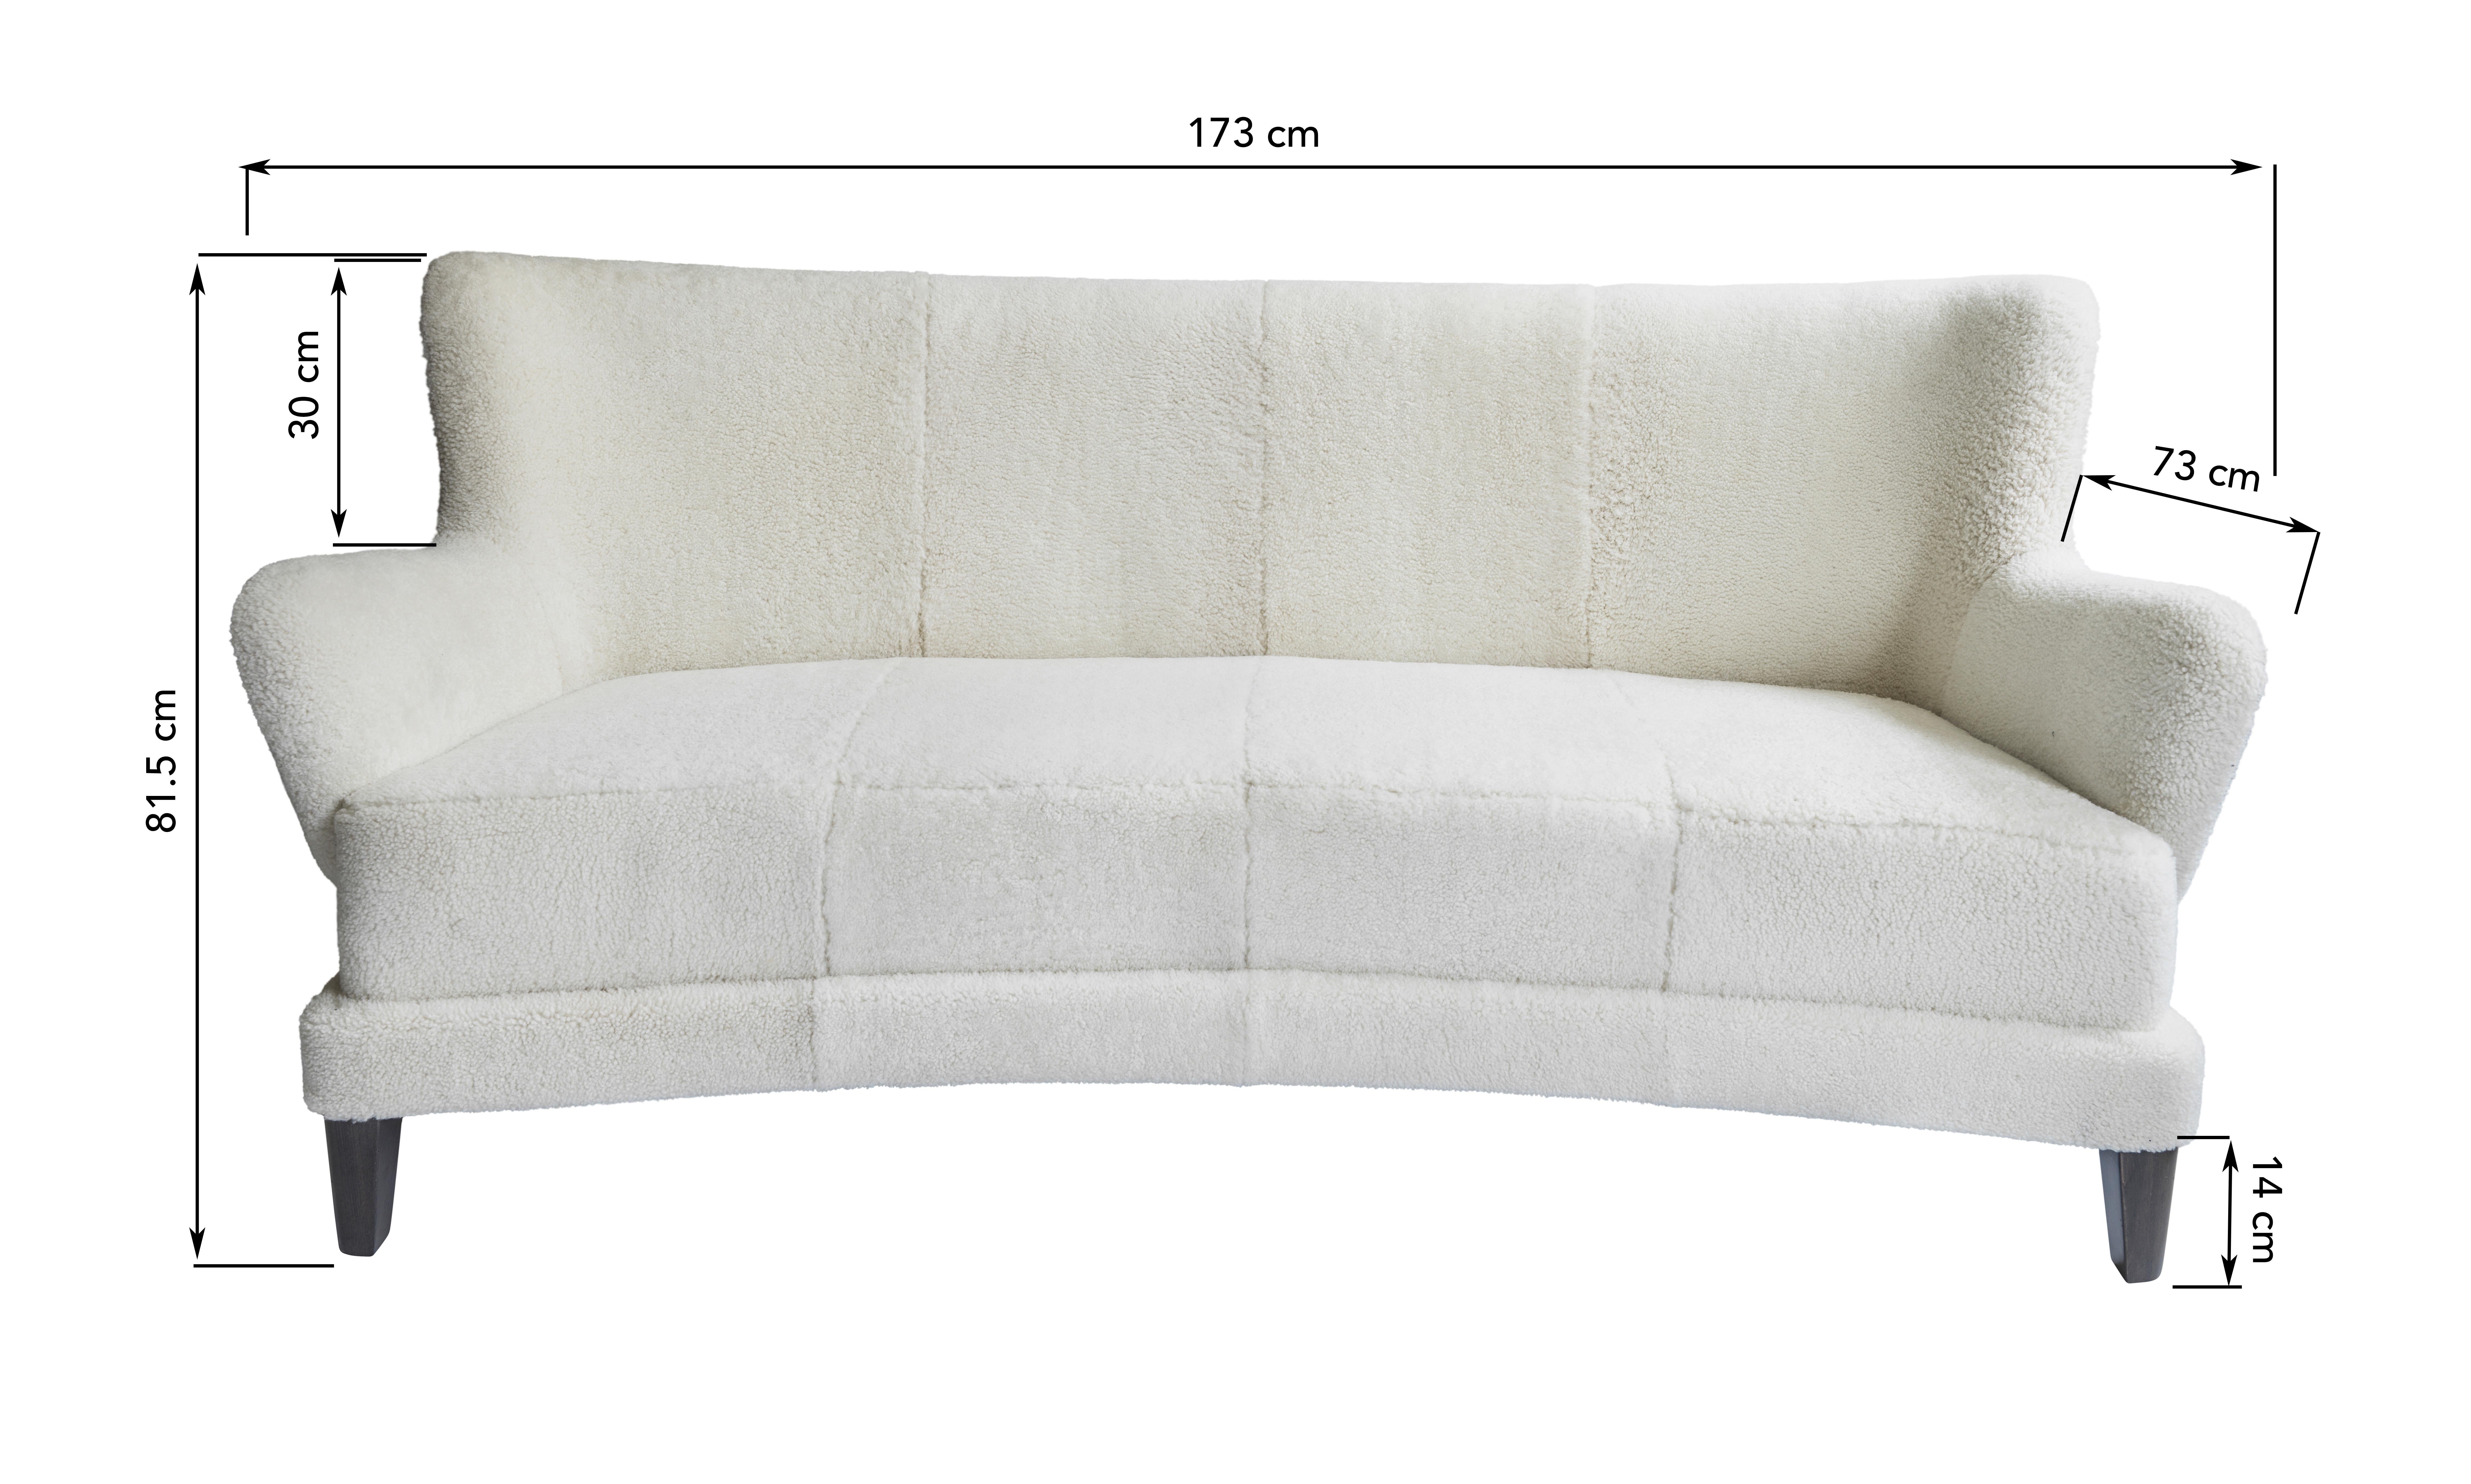 Art Deco Contemporary Eclipse Curved Sofa in White Sheepskin and Leather Upholstery For Sale